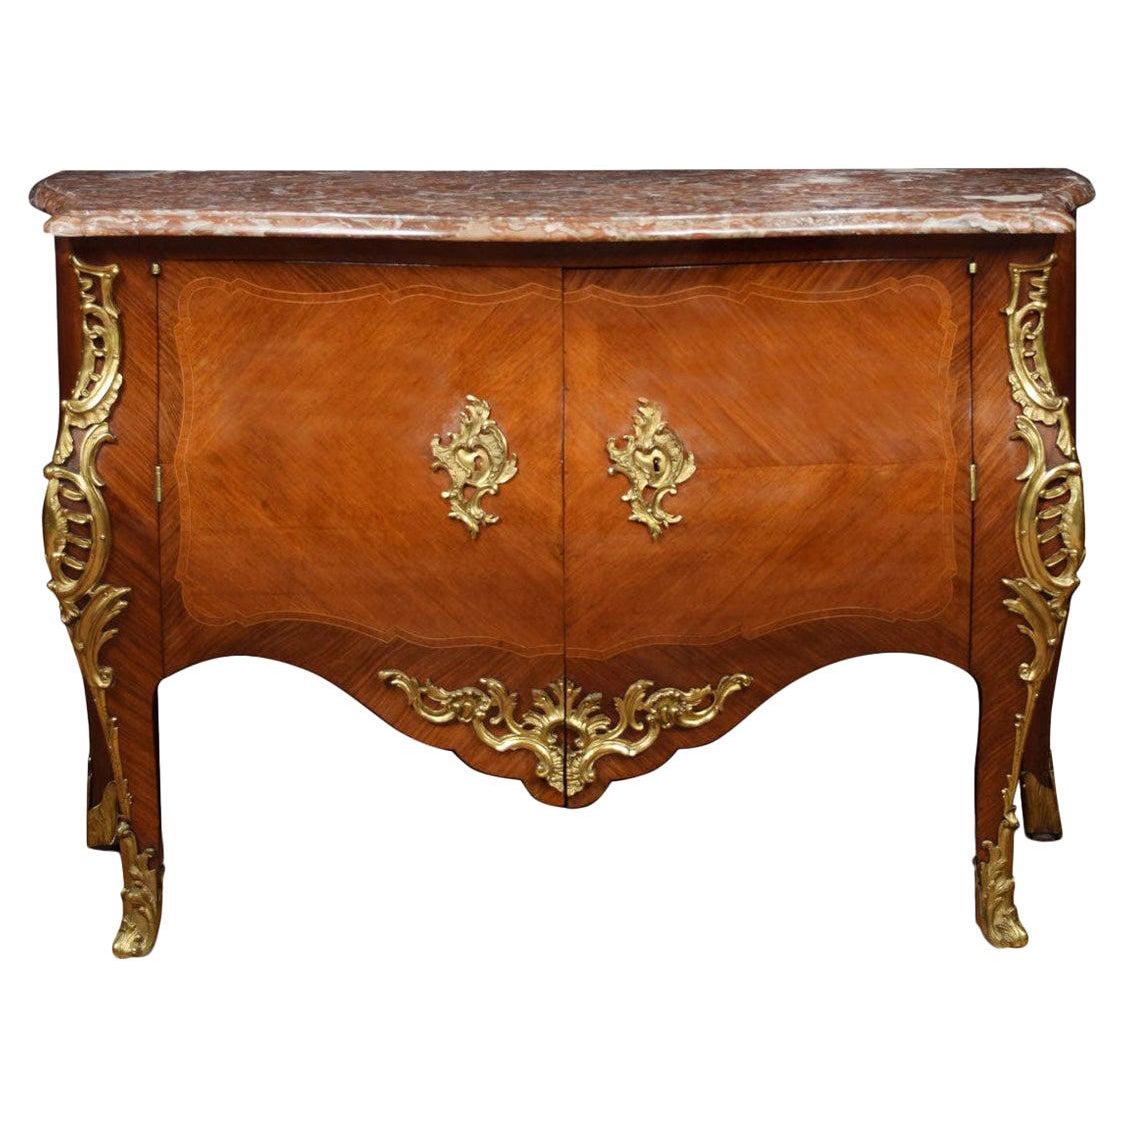 Late 18th Century French Gilt Bronze-Mounted Commode For Sale